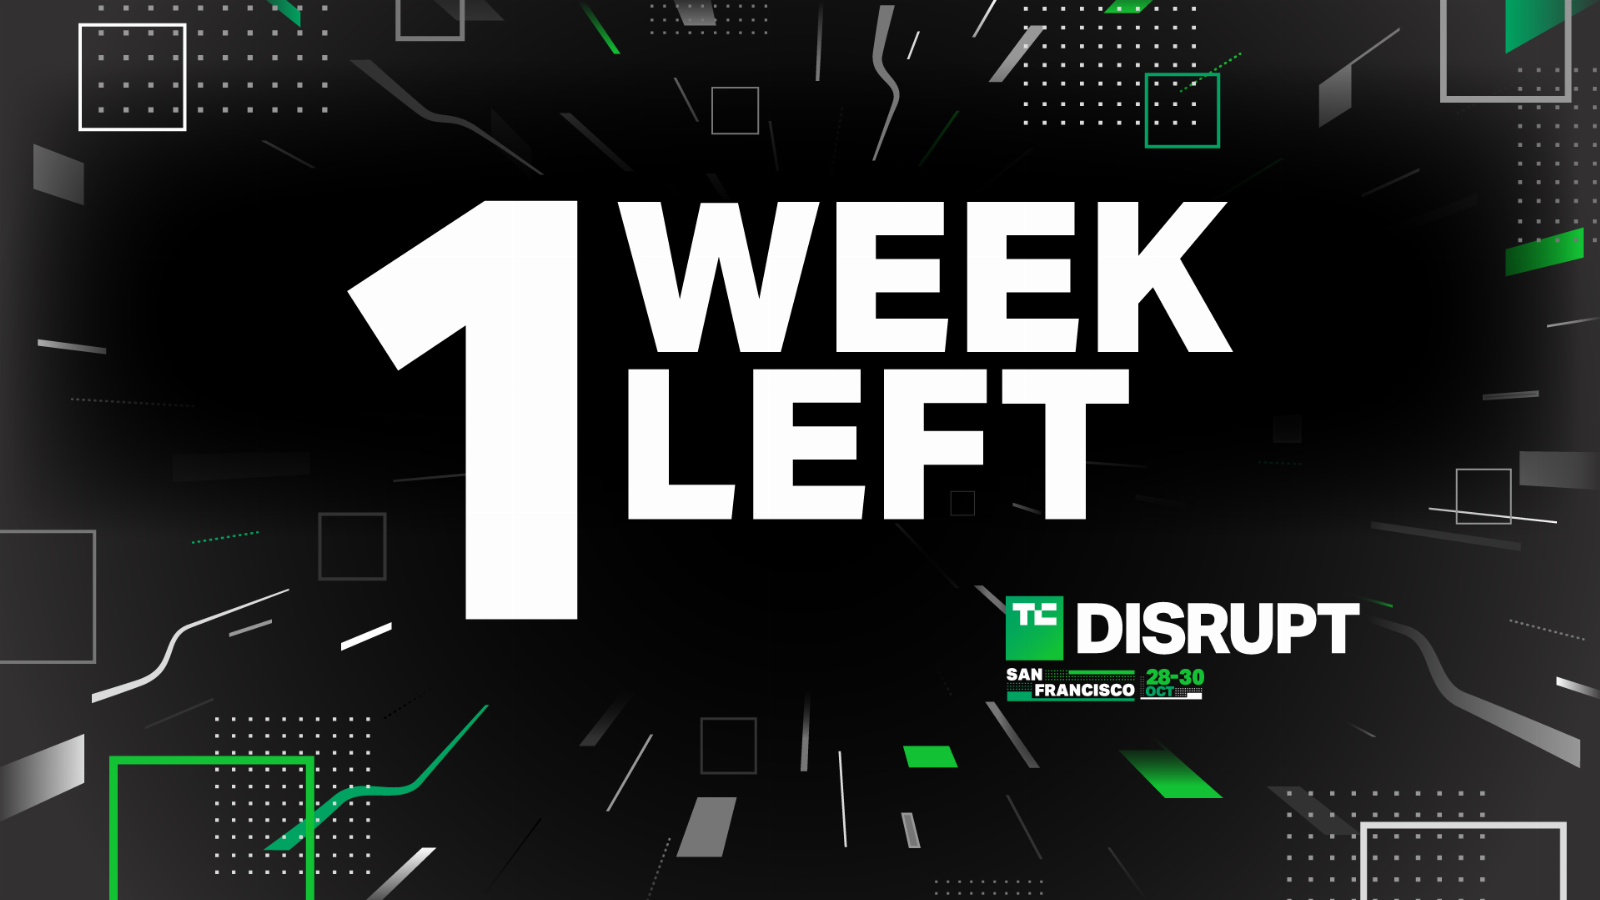 Only 7 days left to save $1,000 on Disrupt passes